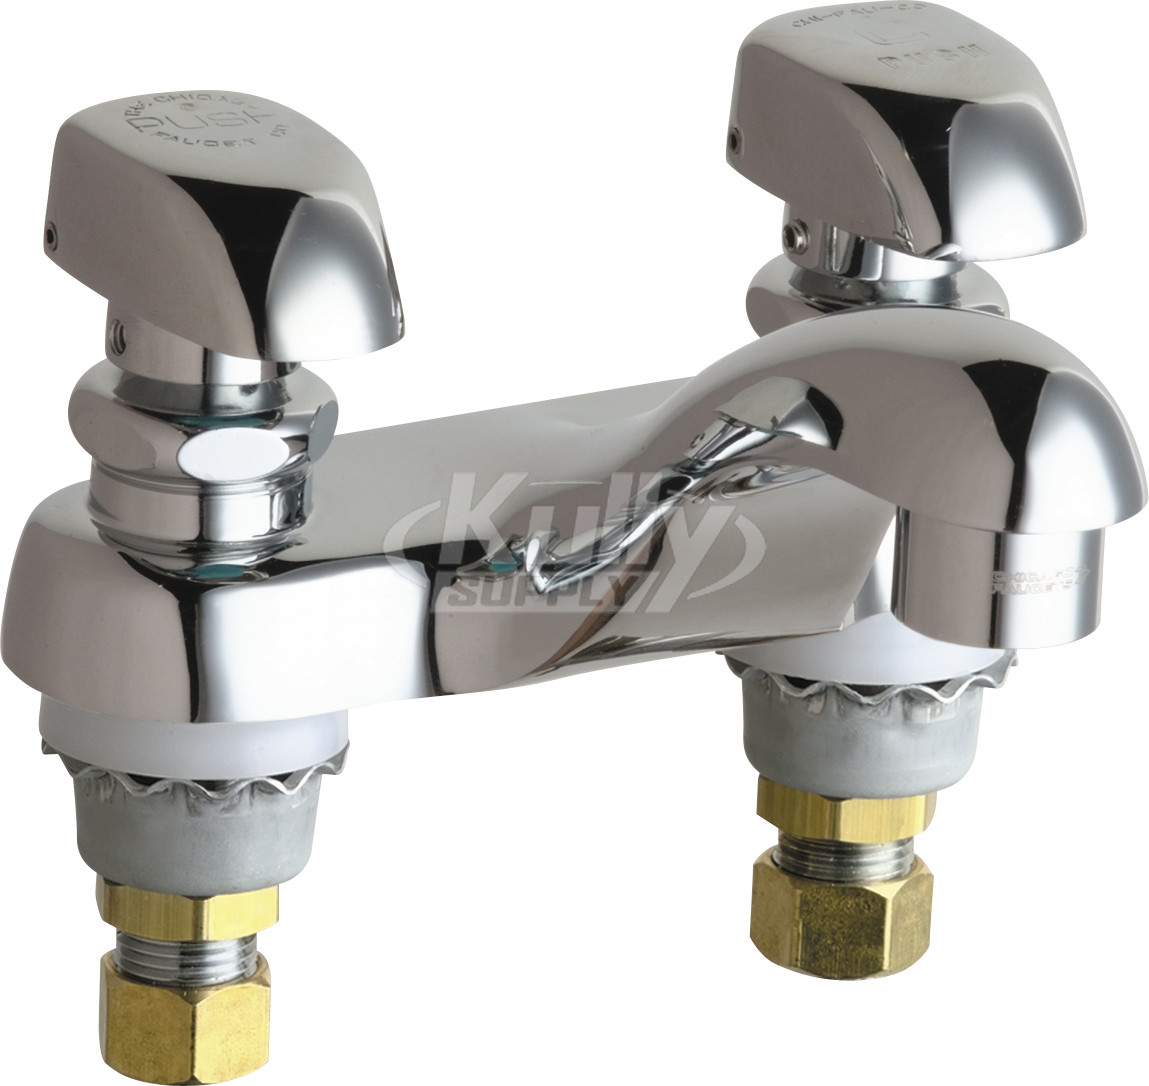 Chicago 802-V335ABCP Hot and Cold Water Metering Sink Faucet